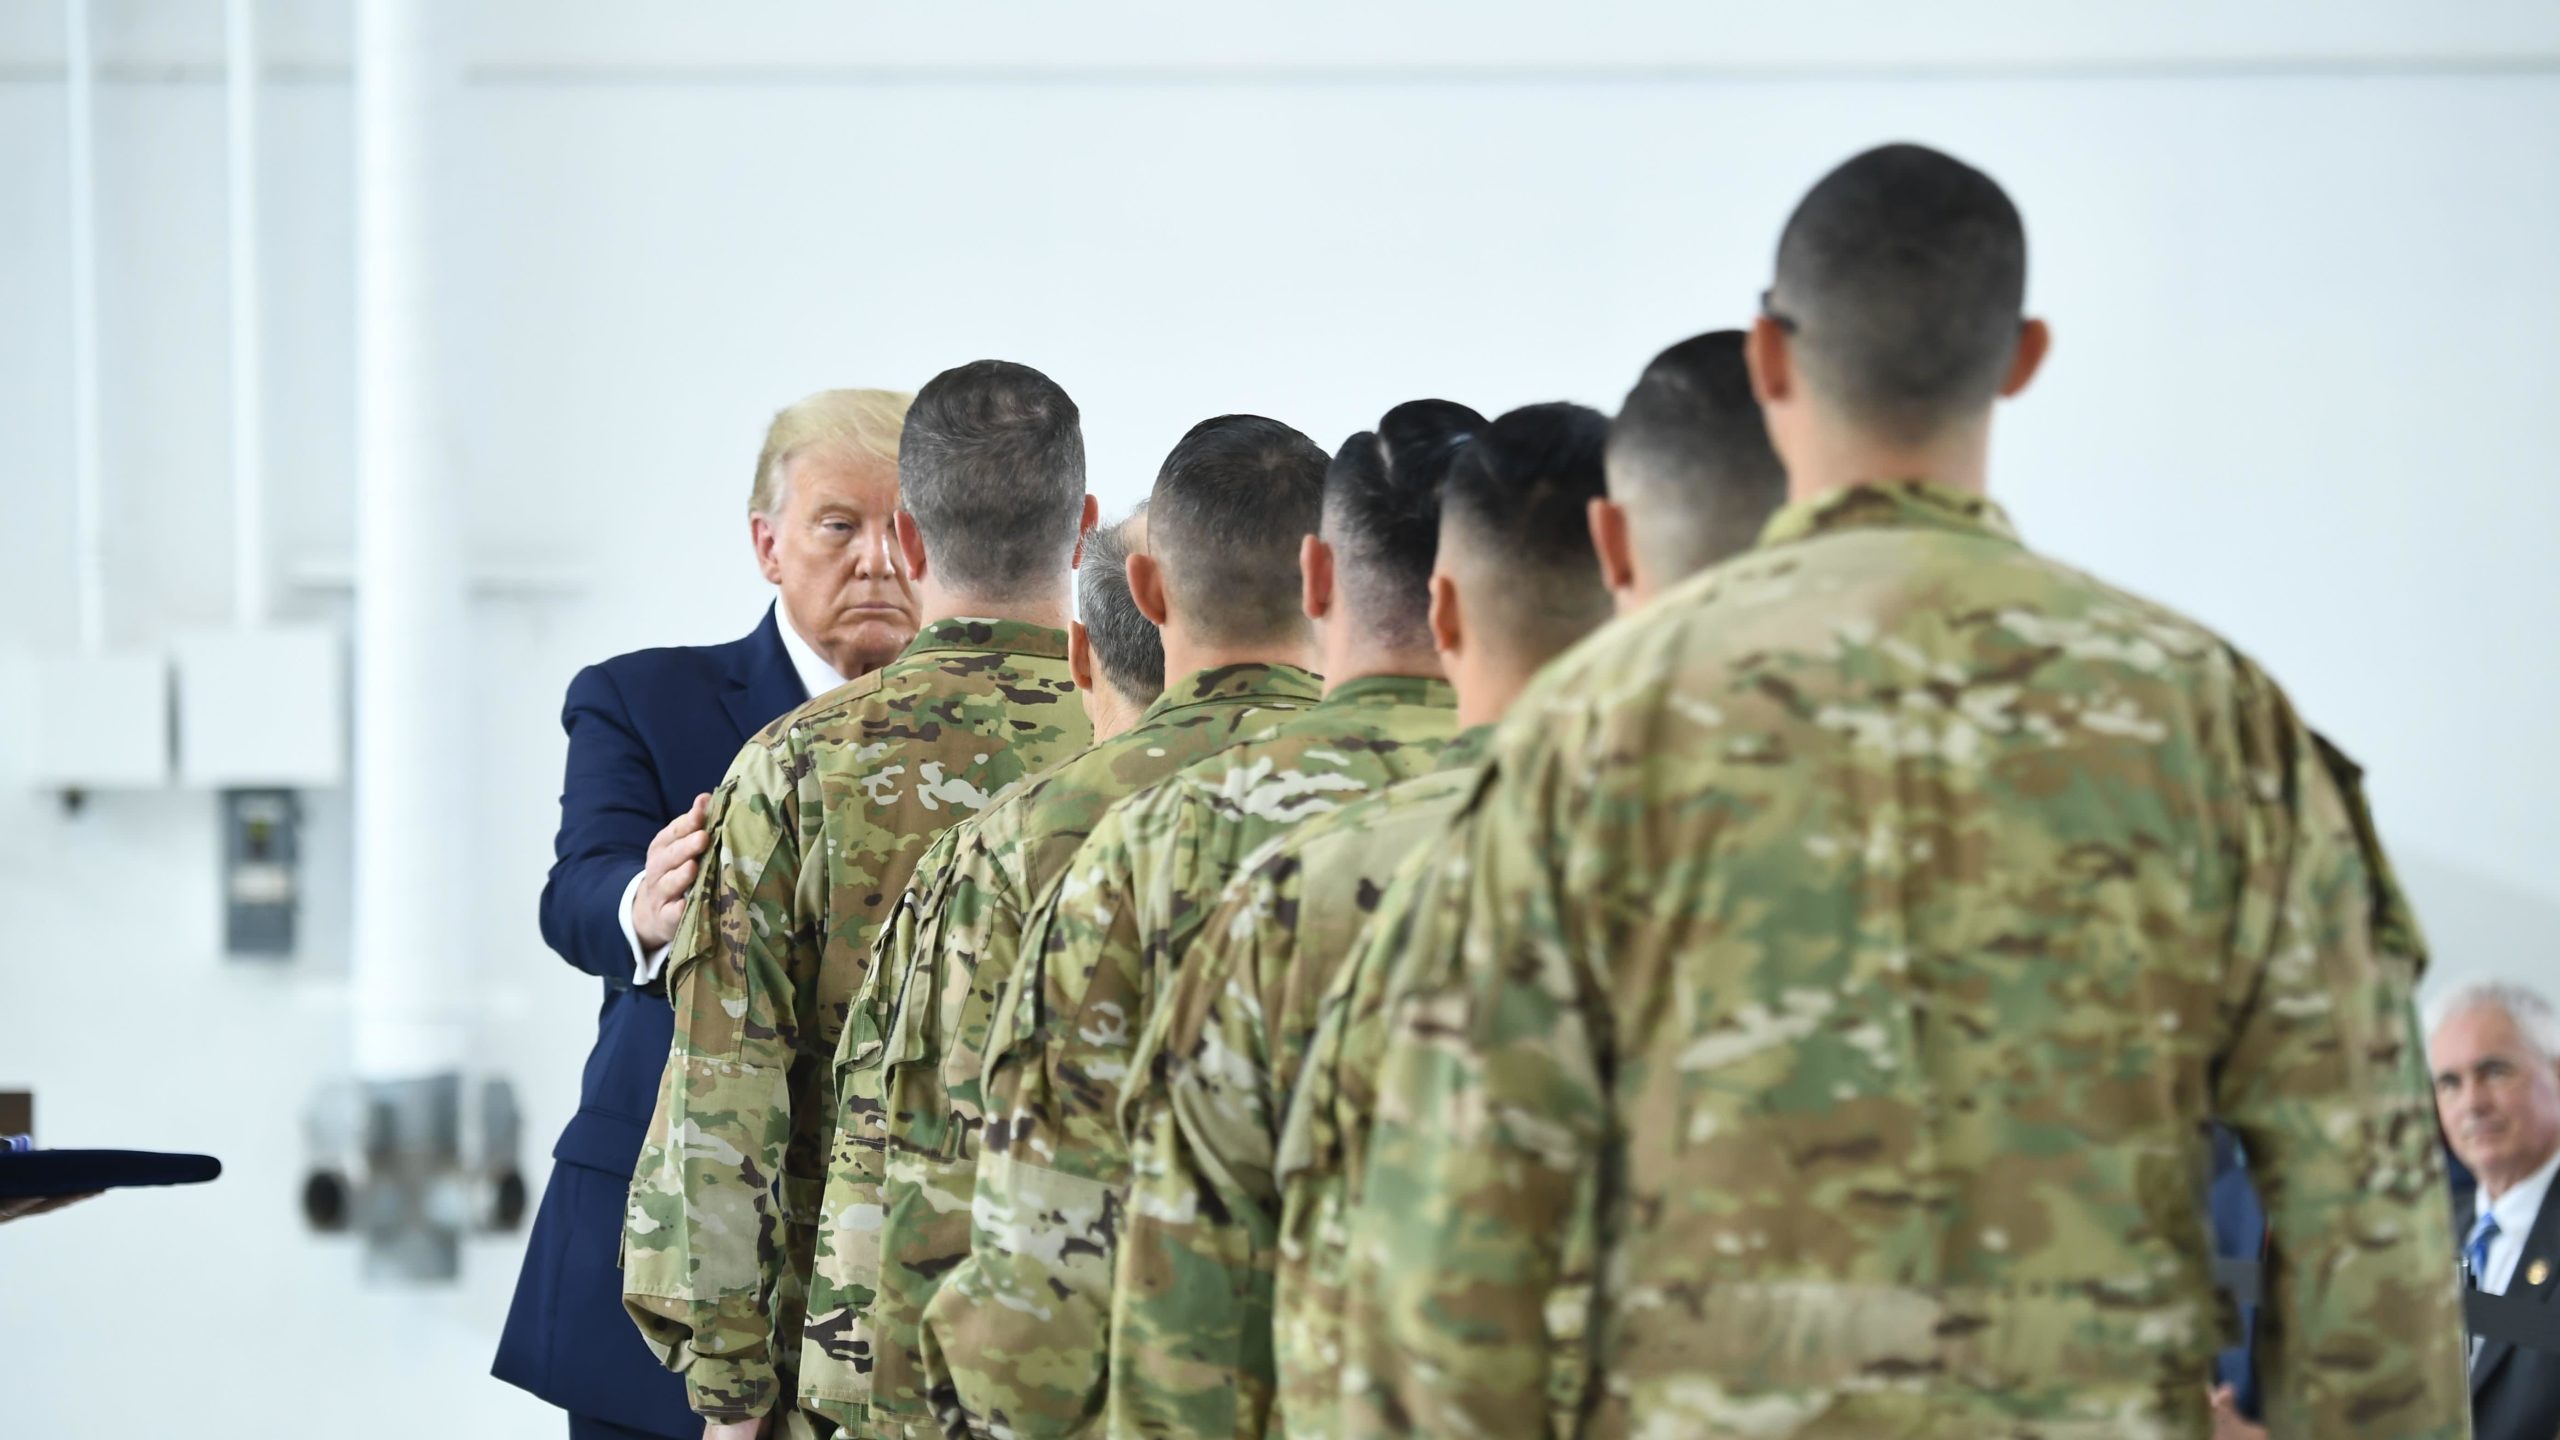 U.S. President Donald Trump awards the Distinguished Flying Cross to pilots and crew members of the California Army National Guard who saved 242 lives from the wildfires on Sept. 5. (Photo: Brendan Smialowski/AFP, Getty Images)